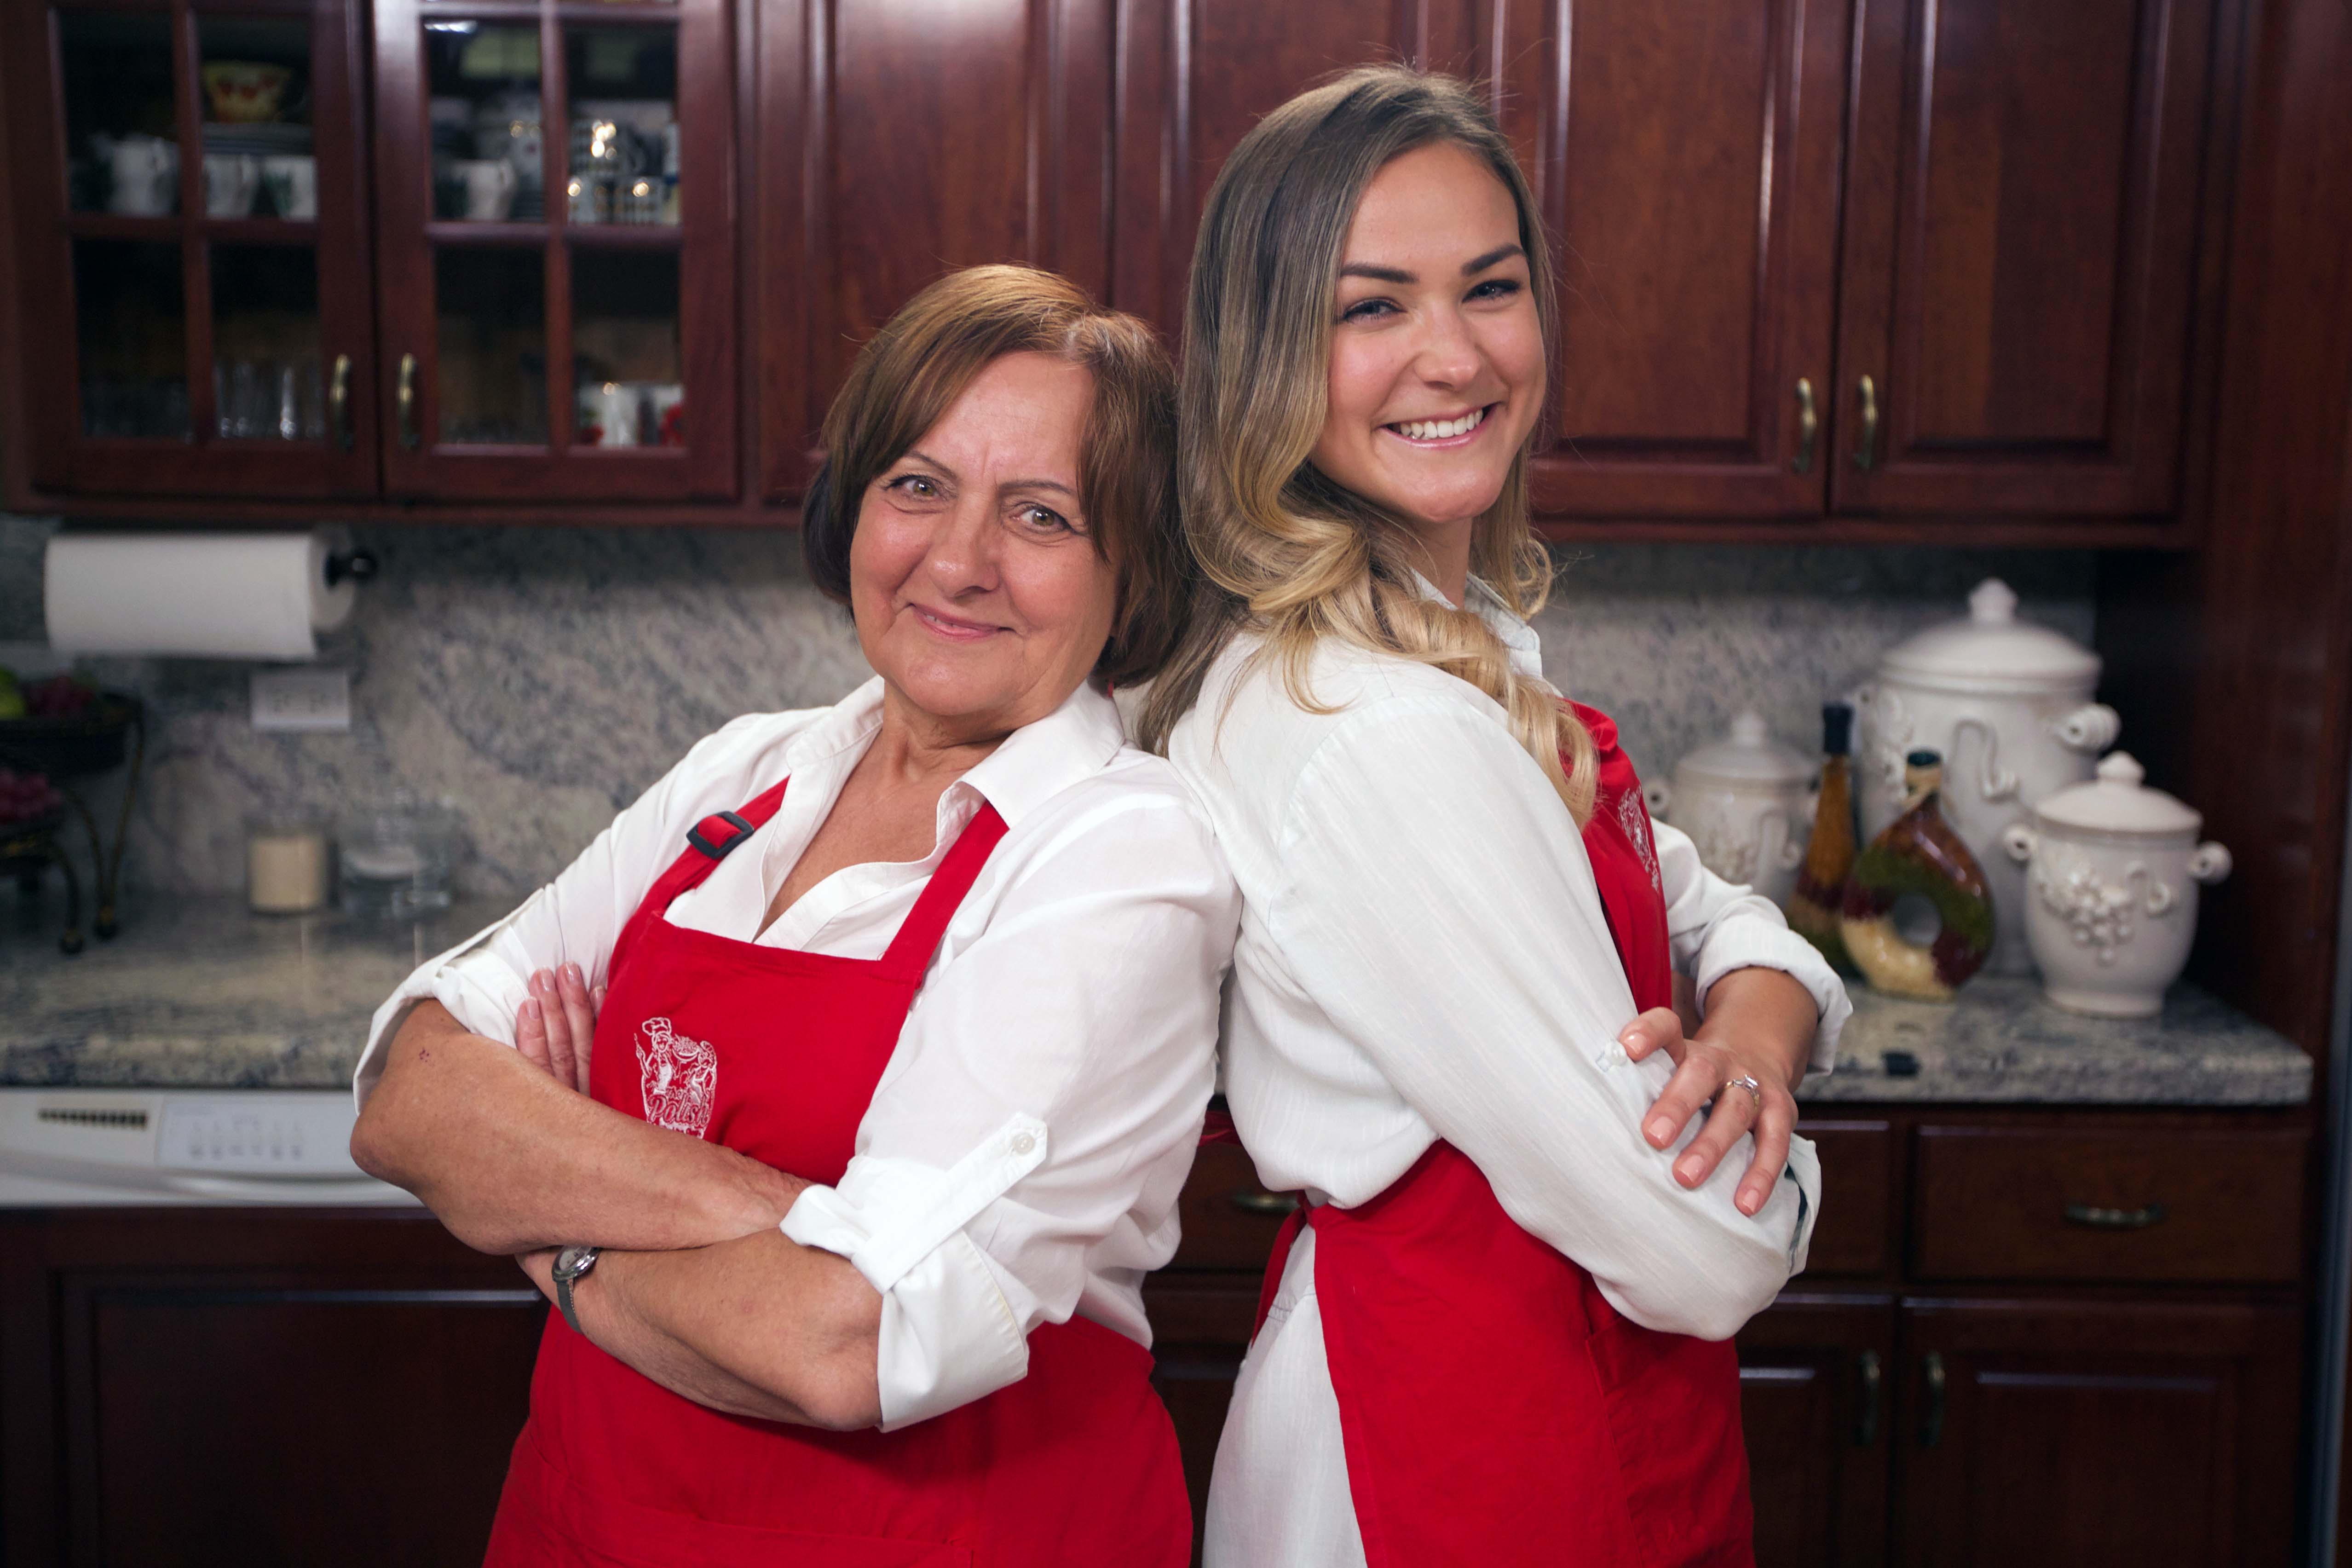 "The Polish Cooking Show" Finds Perfect Hosts in Chicago Polish-American Duo